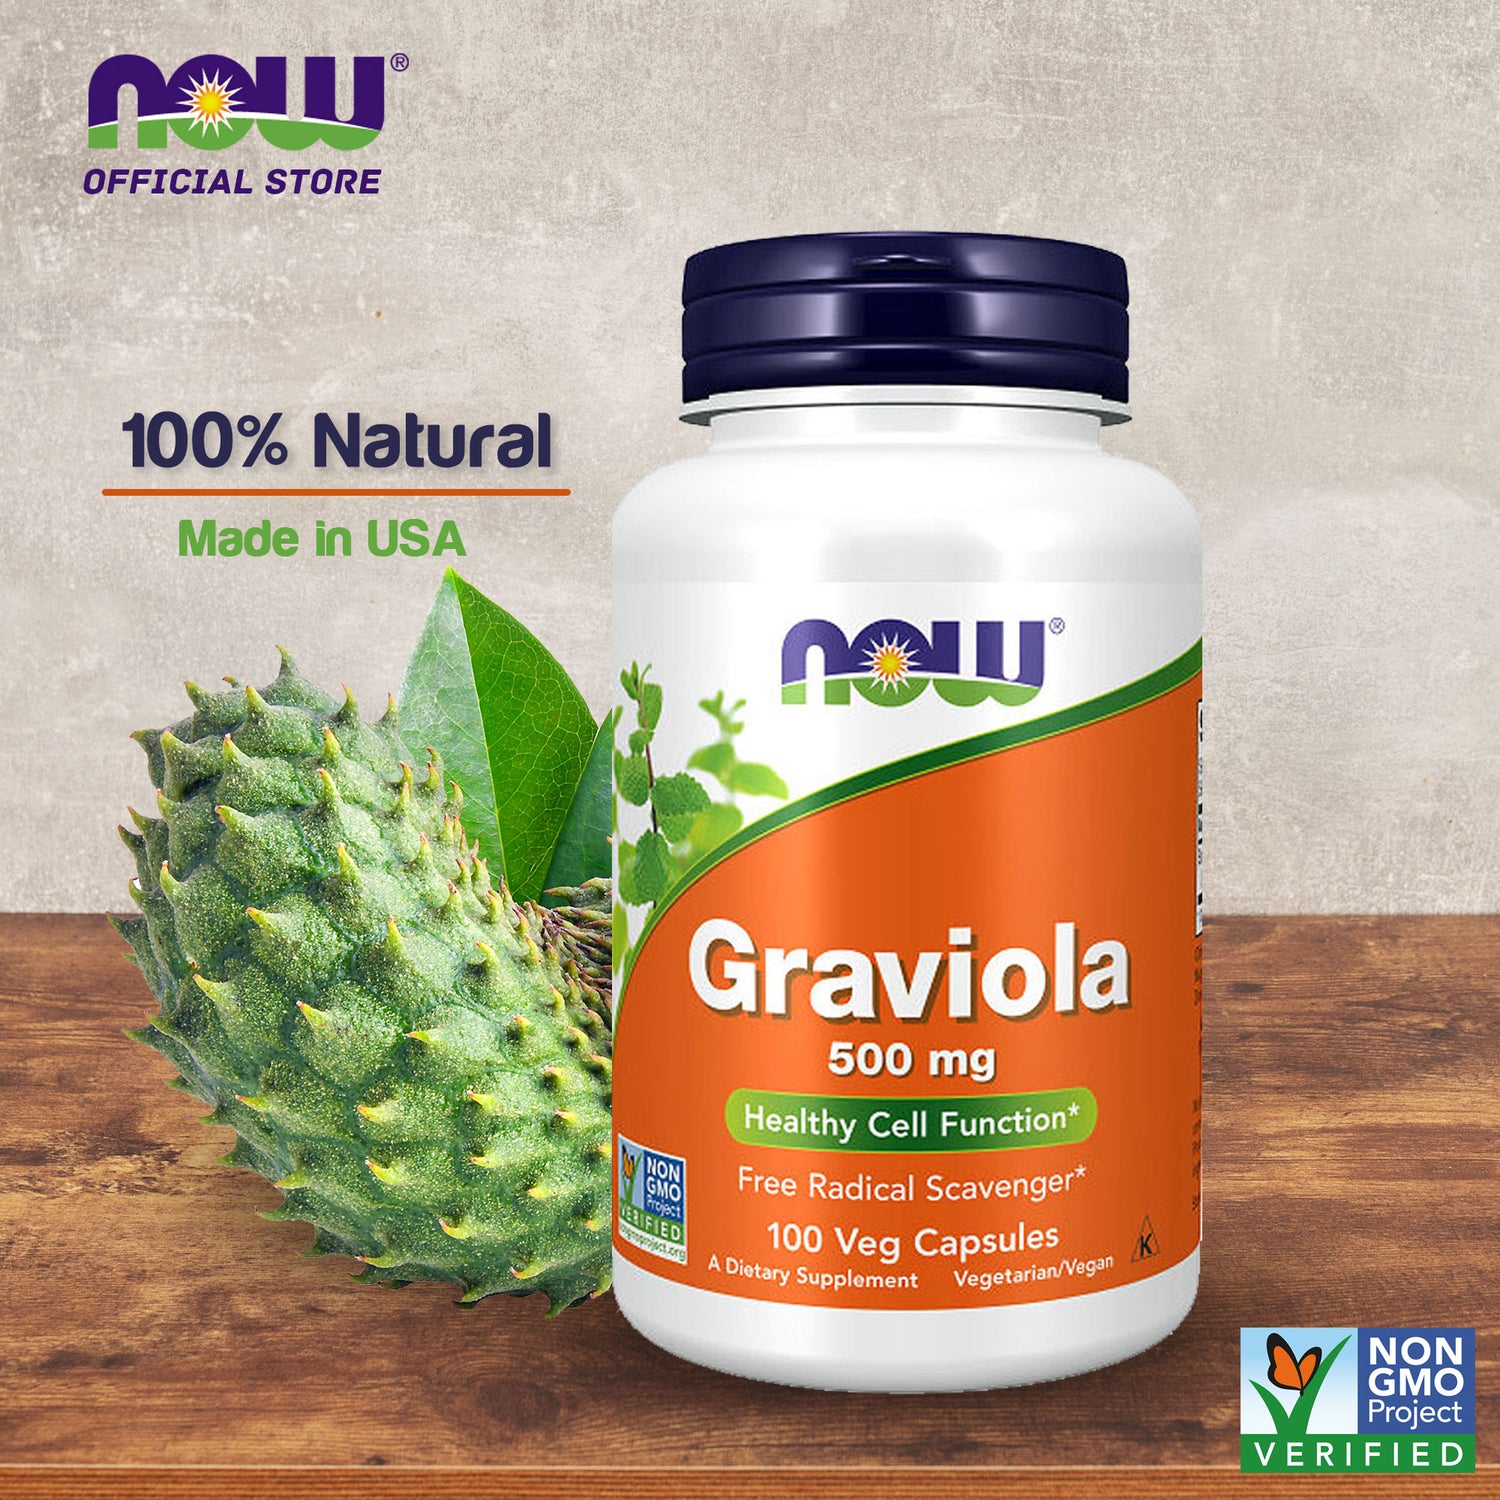 NOW Supplements, Graviola (Annona muricata) 500 mg, Healthy Cell Function*, 100 Veg Capsules - Bloom Concept